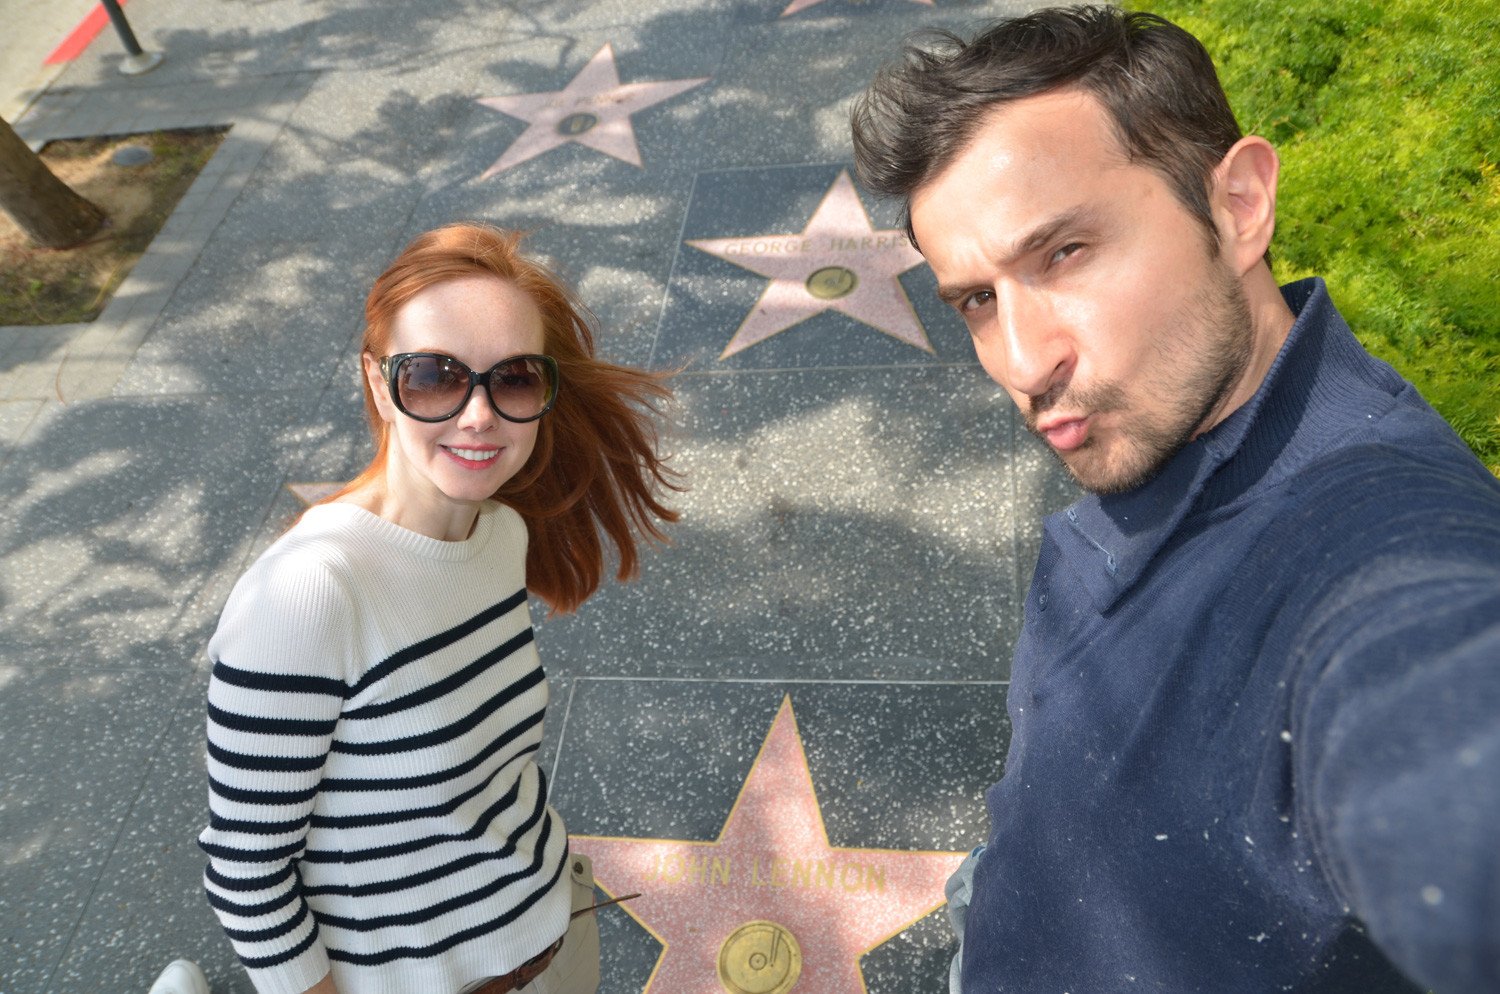 Visiting the Walk of Fame on Hollywood Boulevard